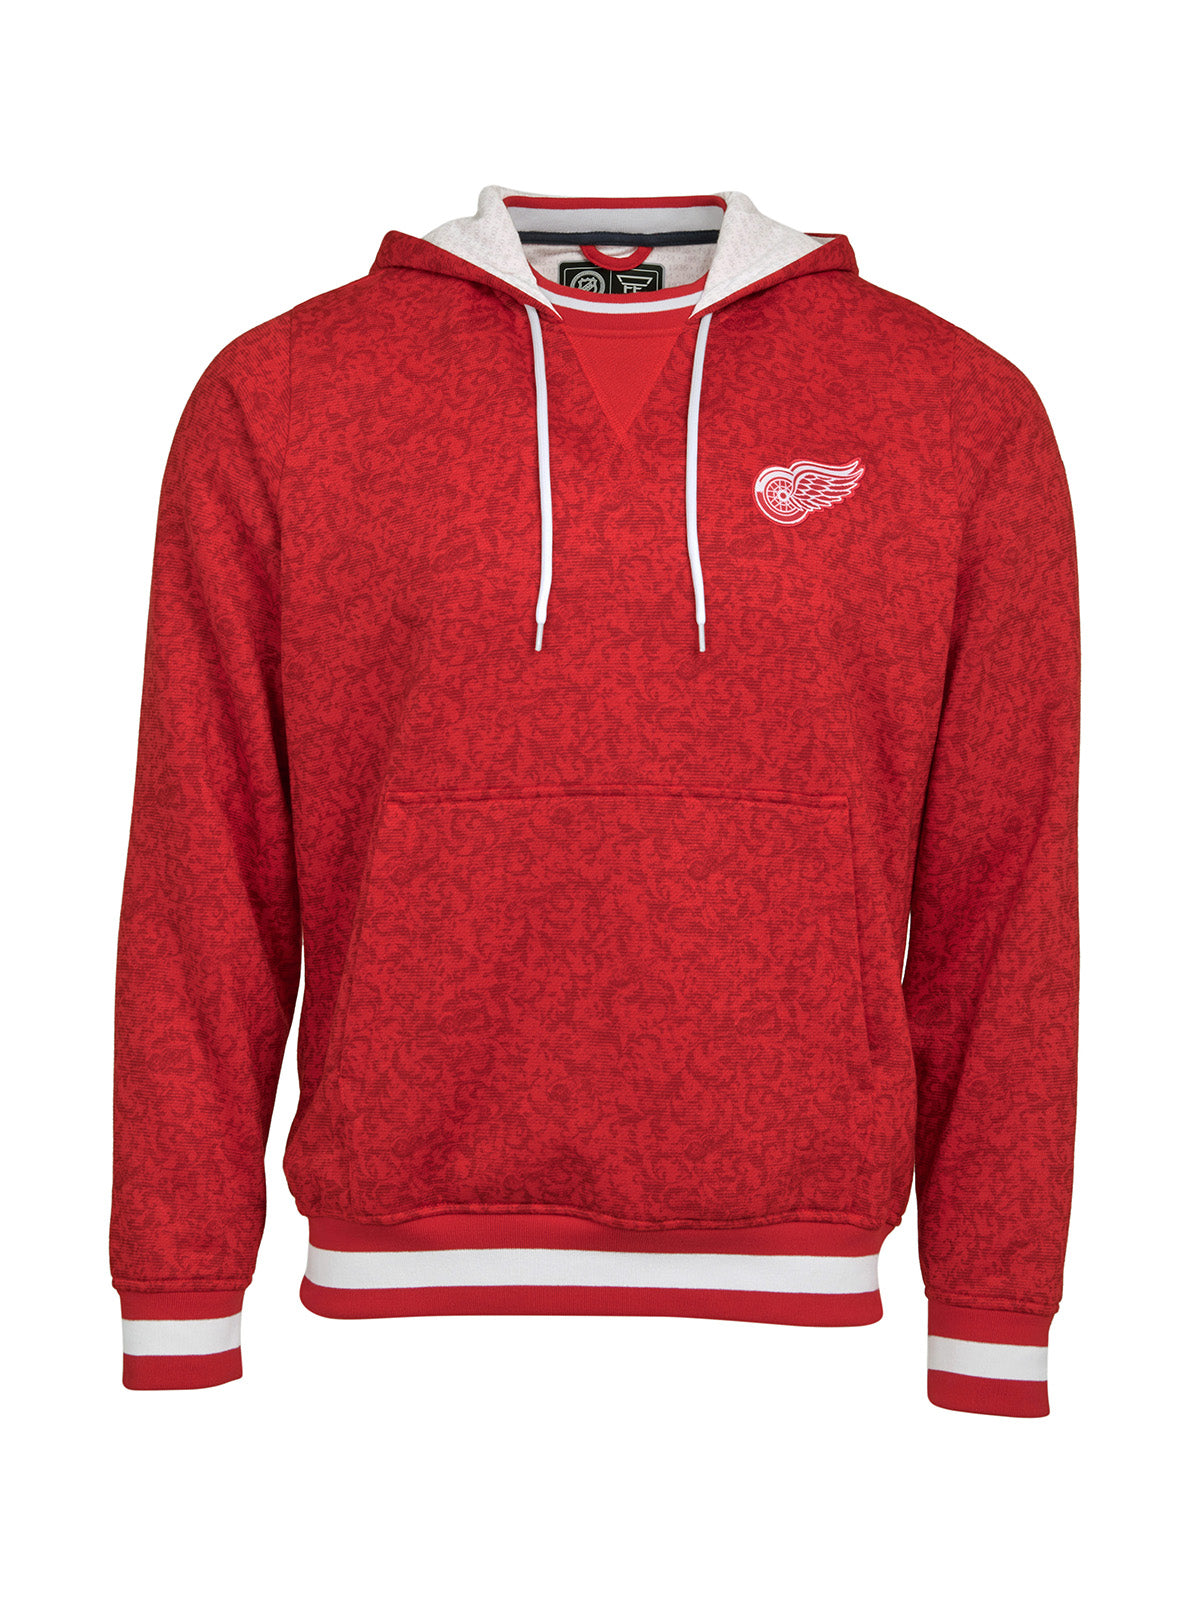 Detroit Red Wings Hoodie - Show your team spirit, with the iconic team logo patch on the front left chest, and proudly display your Detroit Red Wings support in their team colors with this NHL hockey hoodie.